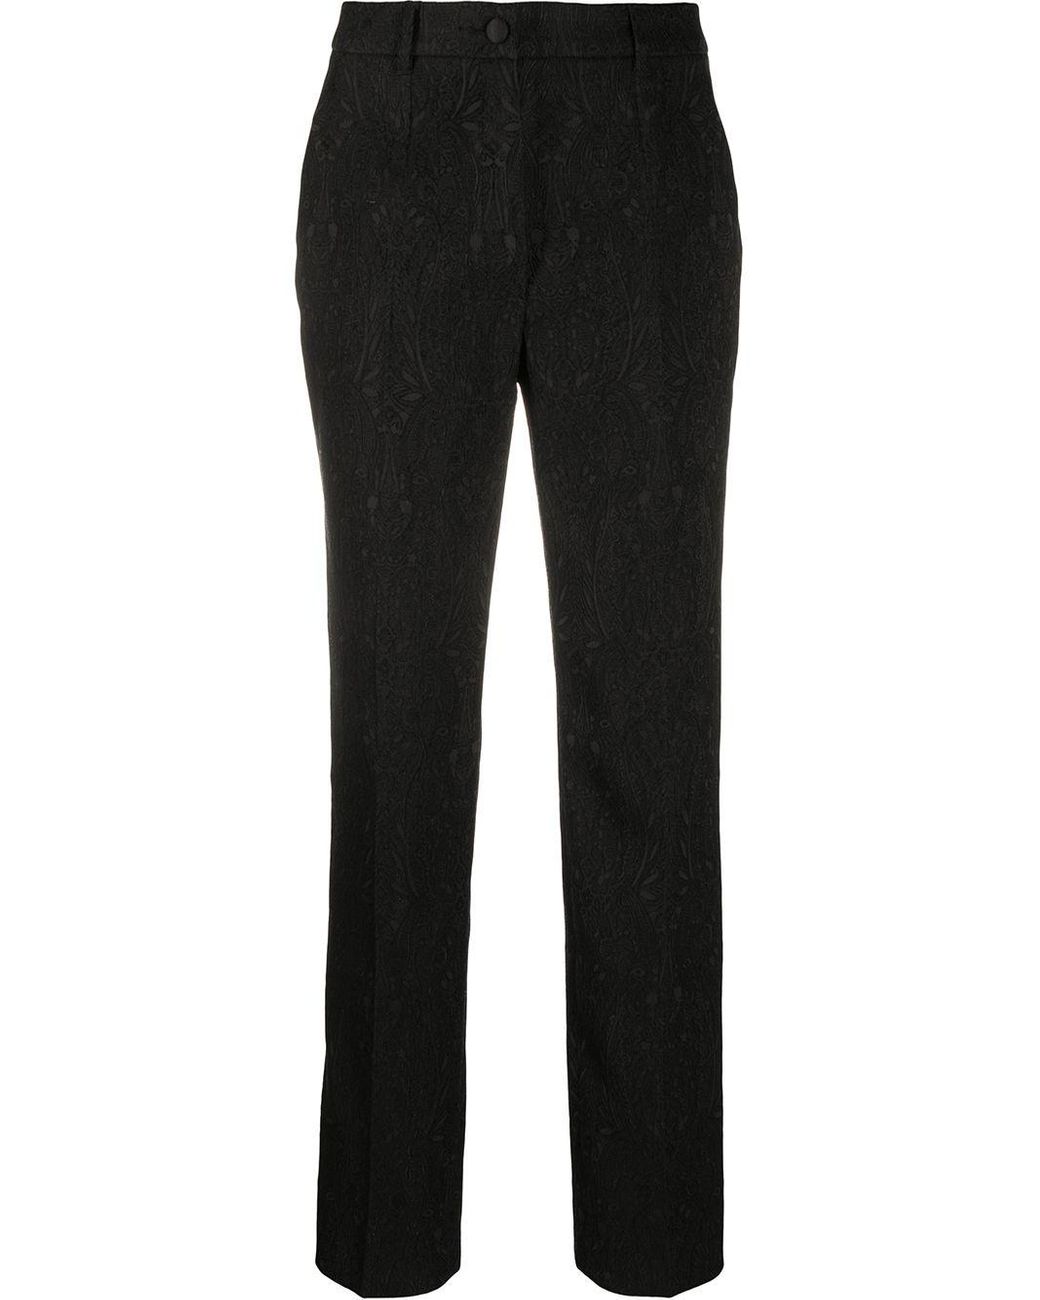 Dolce & Gabbana Synthetic Jacquard Floral Trousers in Black - Lyst